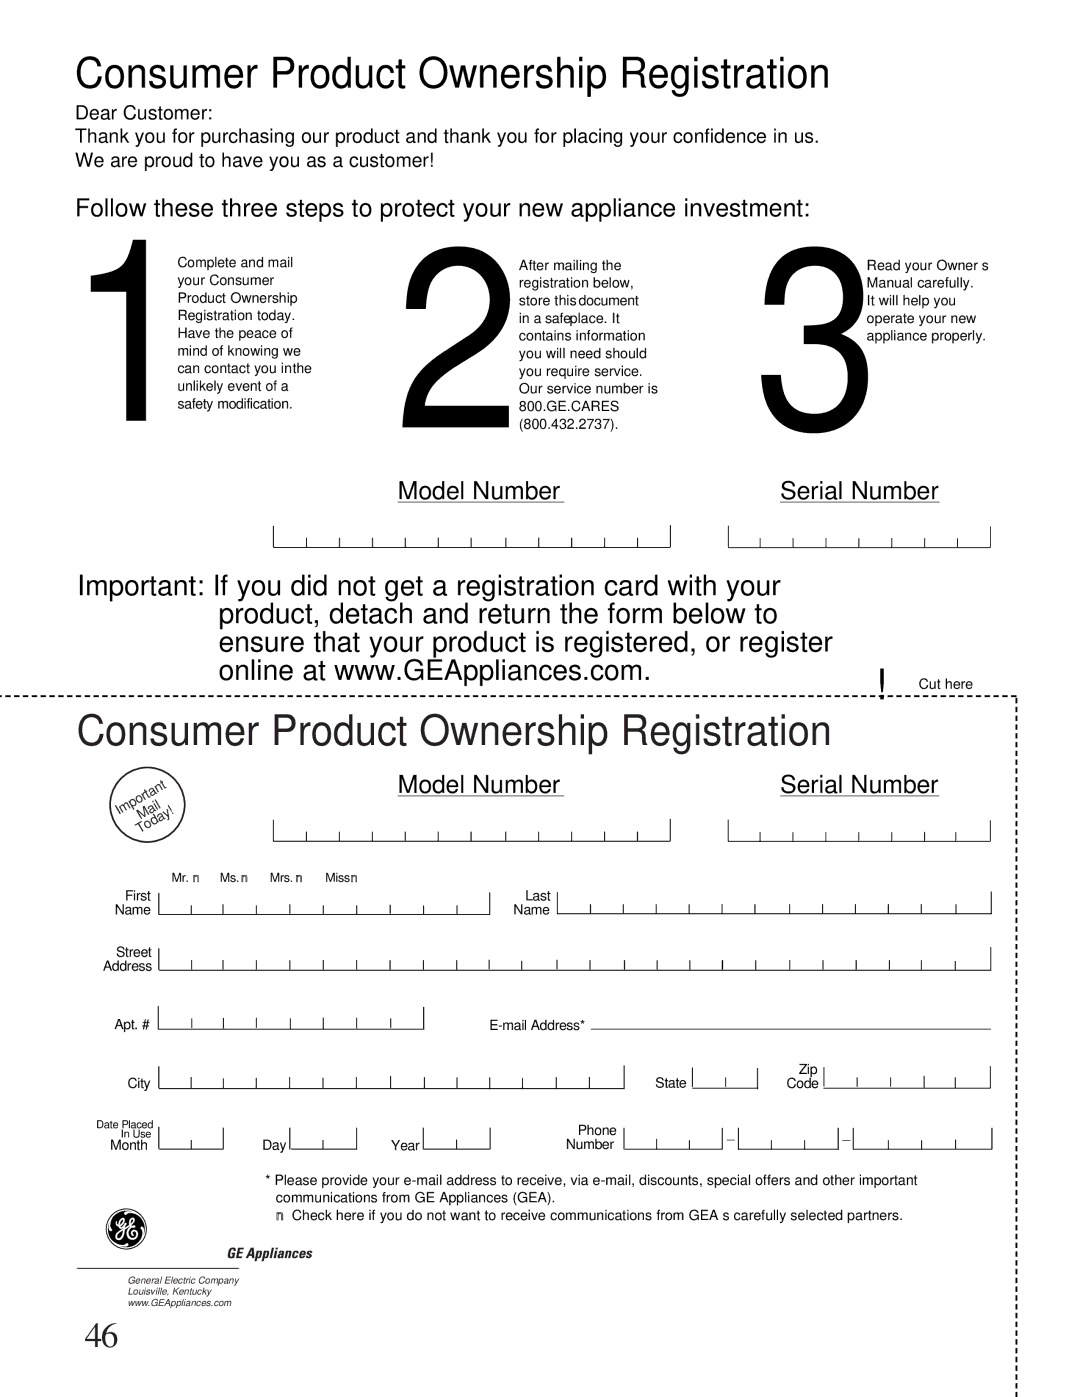 GE LGB128, JGBS02 installation instructions Consumer Product Ownership Registration 